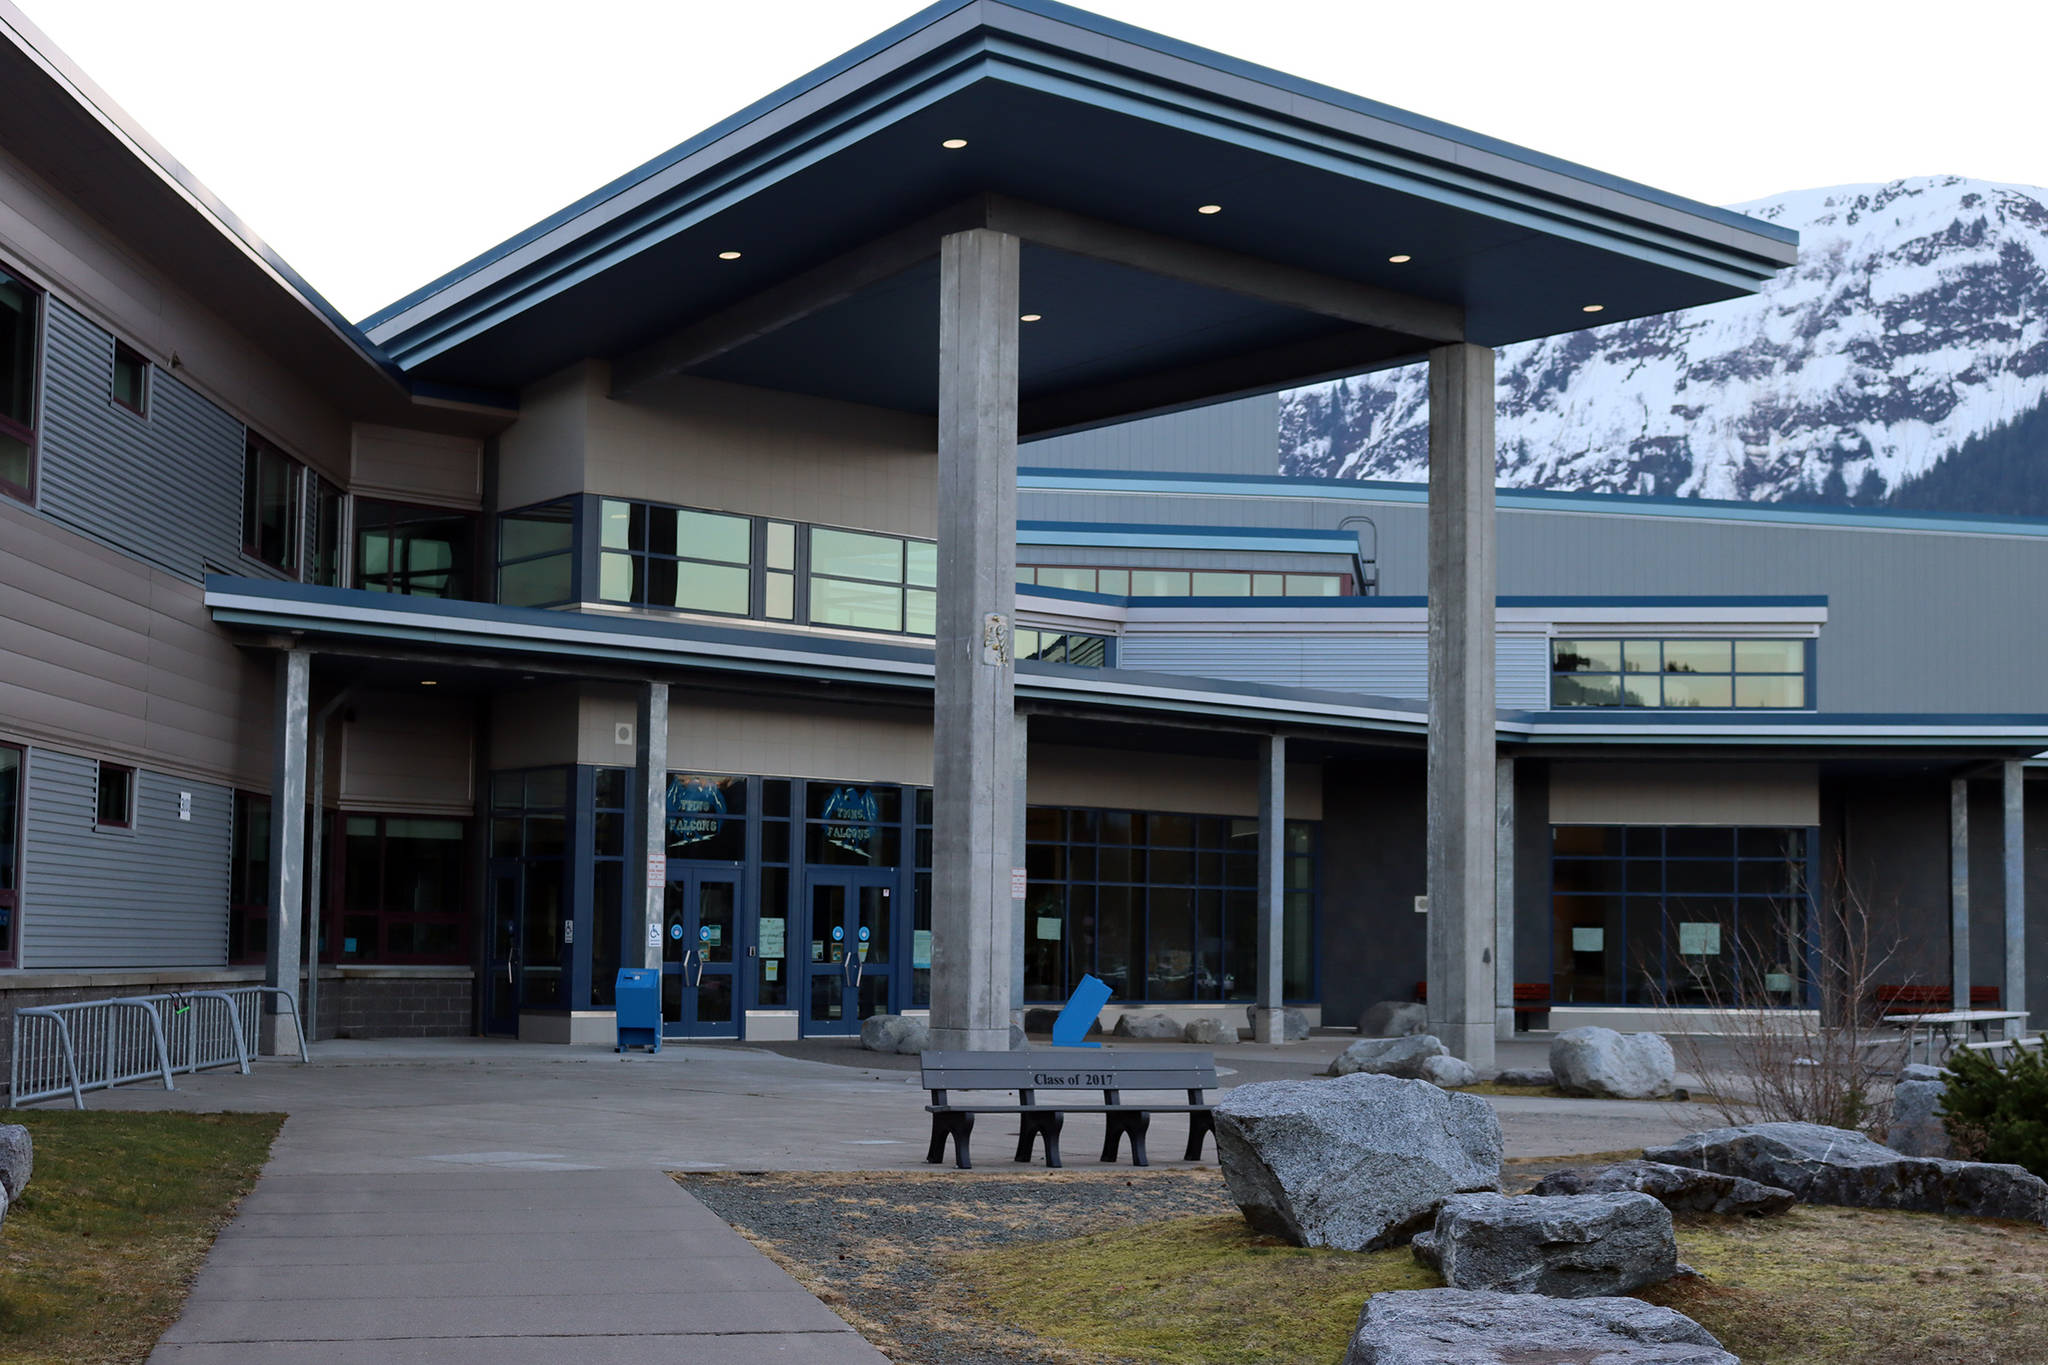 Distance learning will continue Tuesday at Thunder Mountain High School. The school initially shifted to distance delivery for Monday, April 19, following three confirmed cases of COVID-19 at the high school. (Ben Hohenstatt / Juneau Empire)